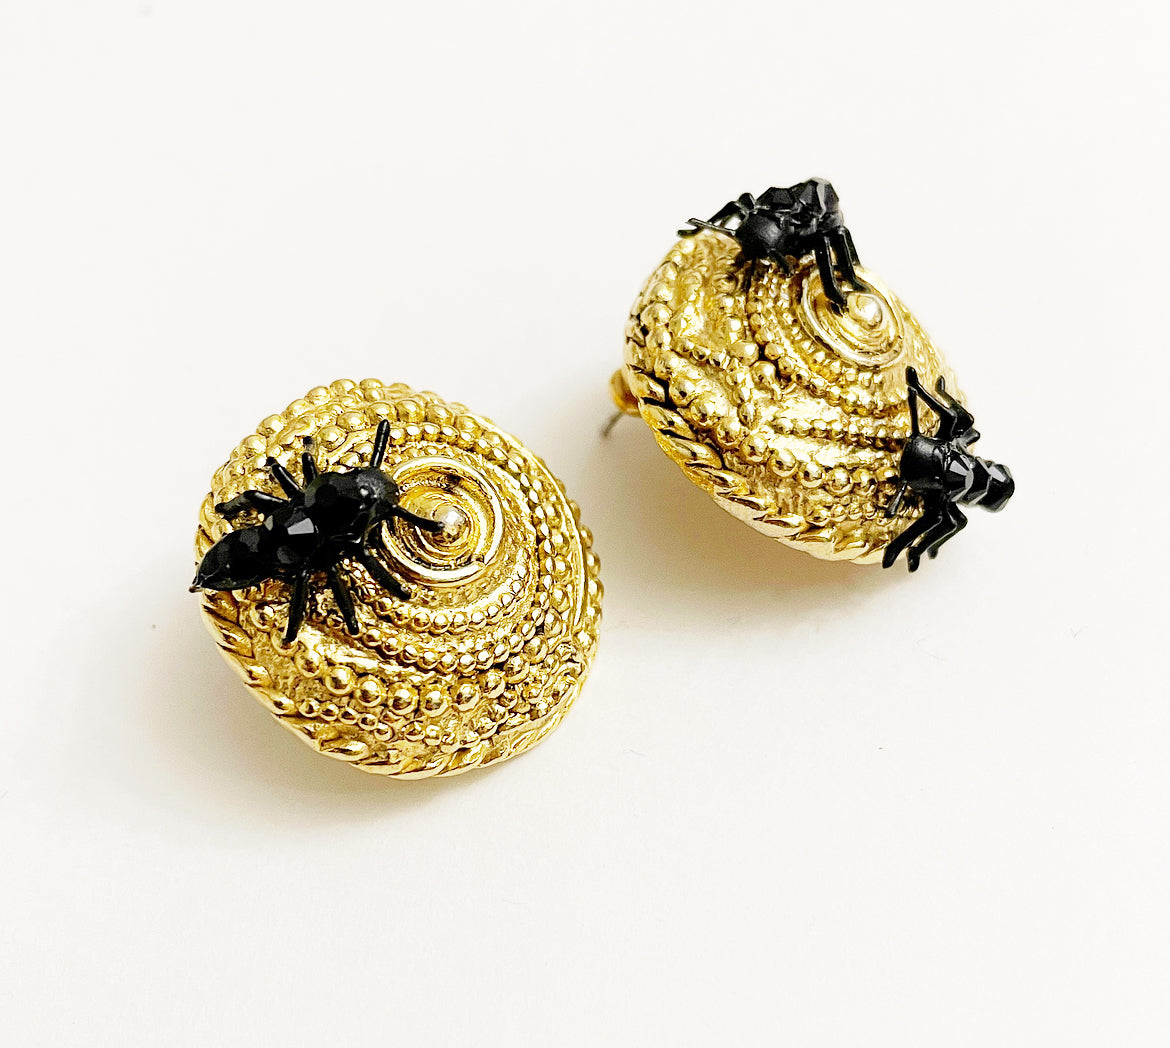 Ant party swirly studs